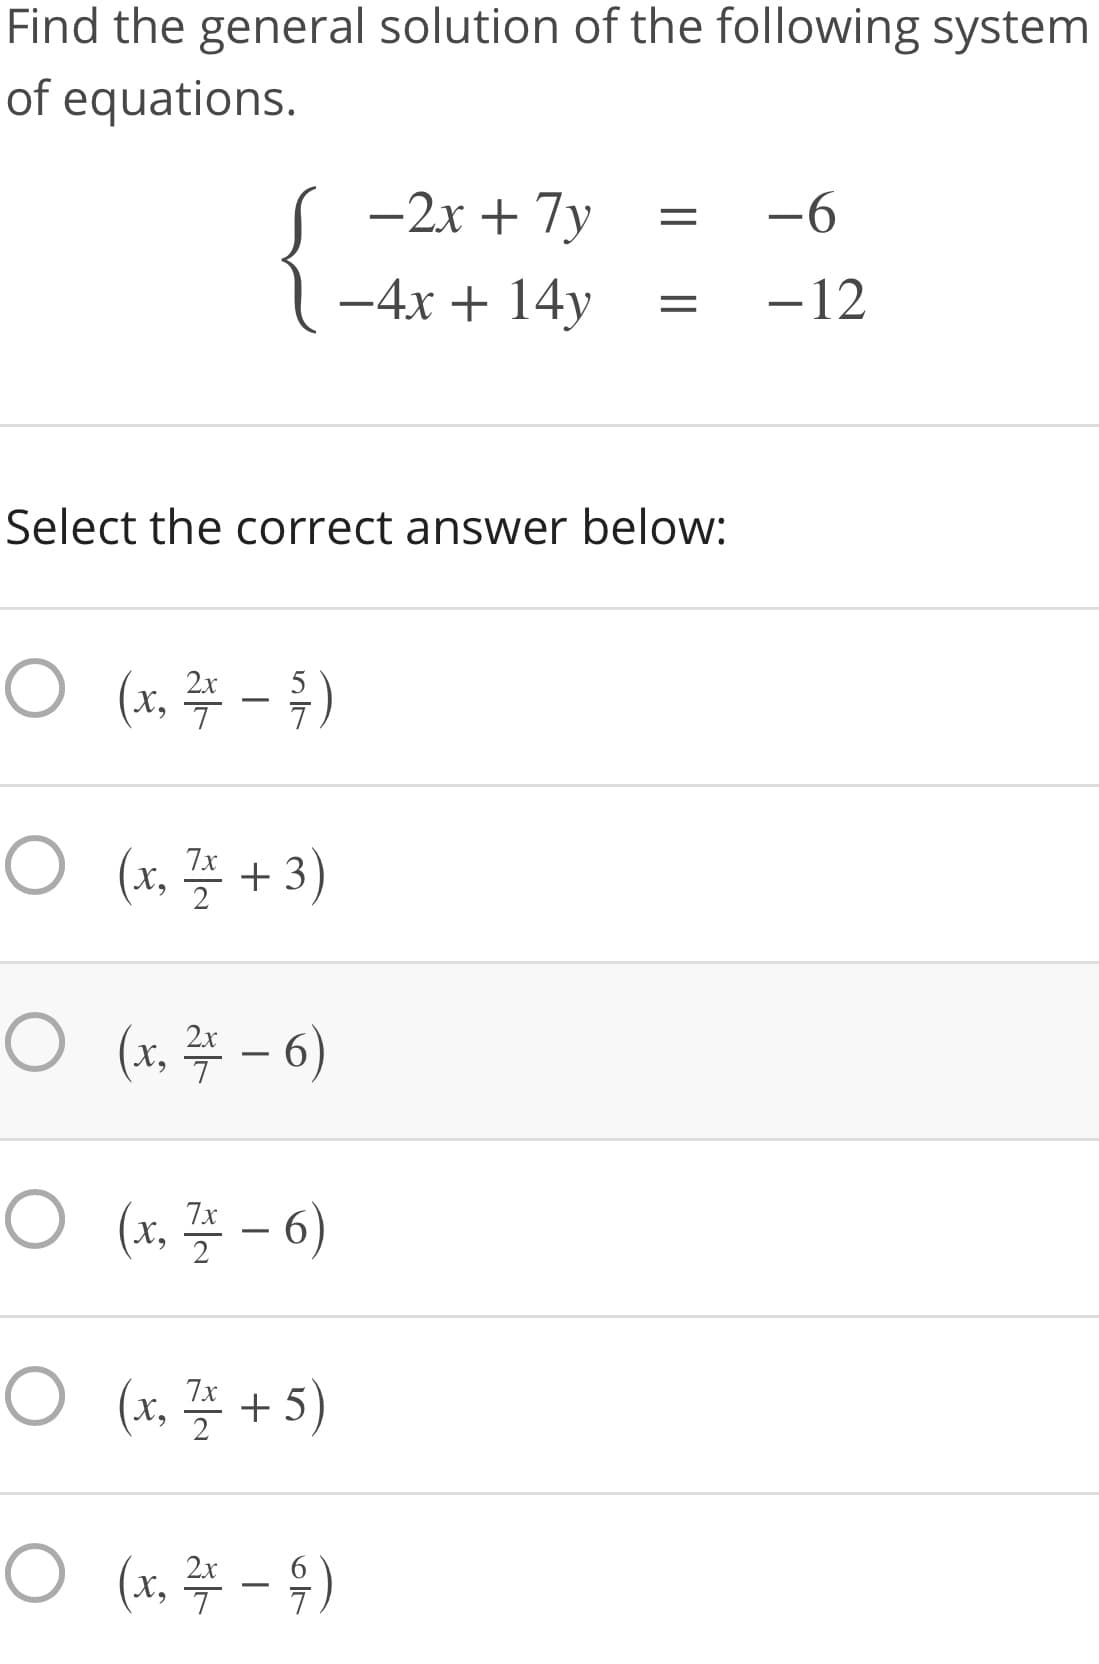 Find the general solution of the following system
of equations.
-2x + 7y
-6
-4x + 14y
-12
Select the correct answer below:
2x
5
O (, 플 + 3)
7x
2
2x
X,
7x
X,
2
O (1, 플 + 5)
7x
2x
X,
